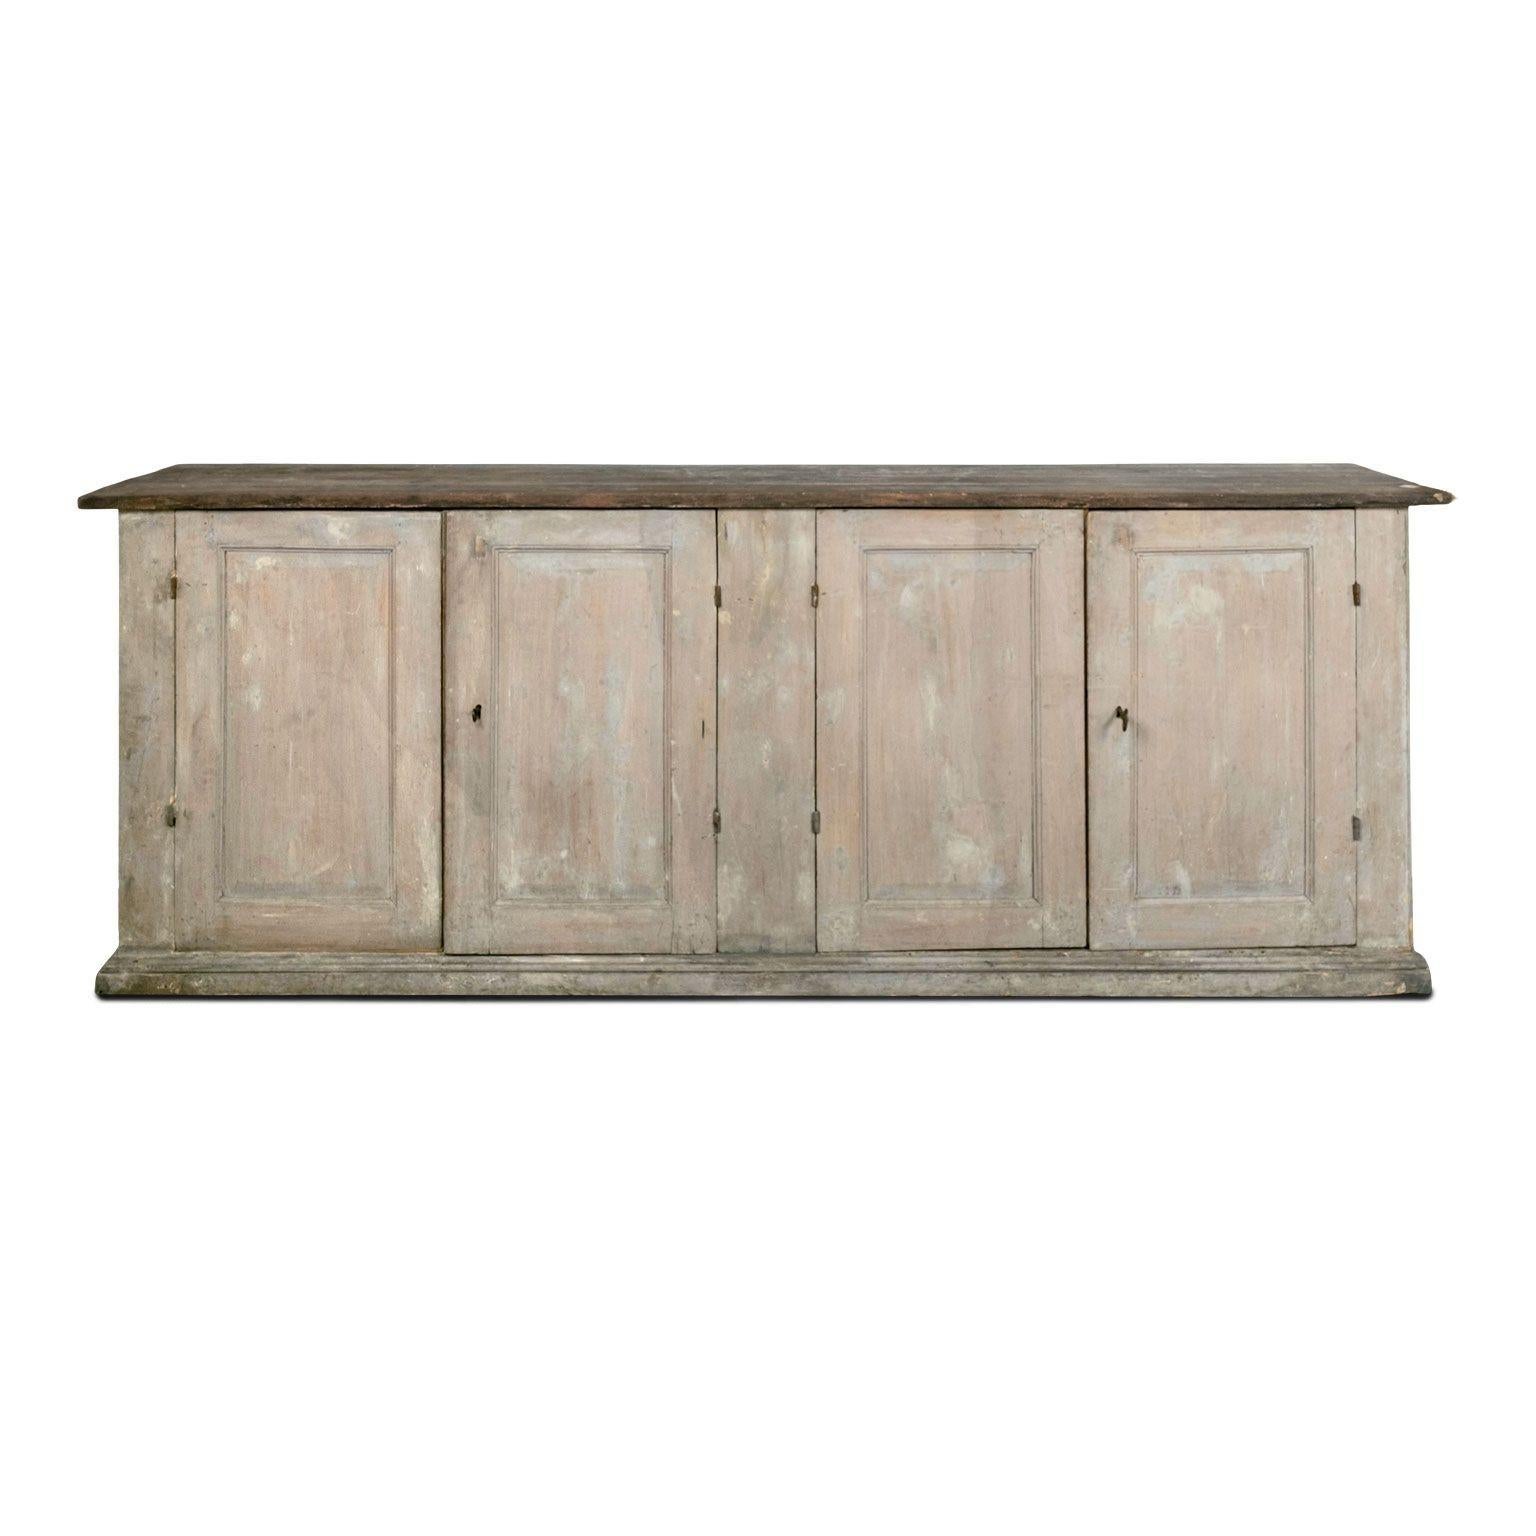 Large four-door painted enfilade, circa 1850-1889, France. Large rustic French enfilade buffet with gray painted with warm salmon color undertones. Large rustic wooden top. Surface edges are smoothed and rounded from centuries of natural wear and